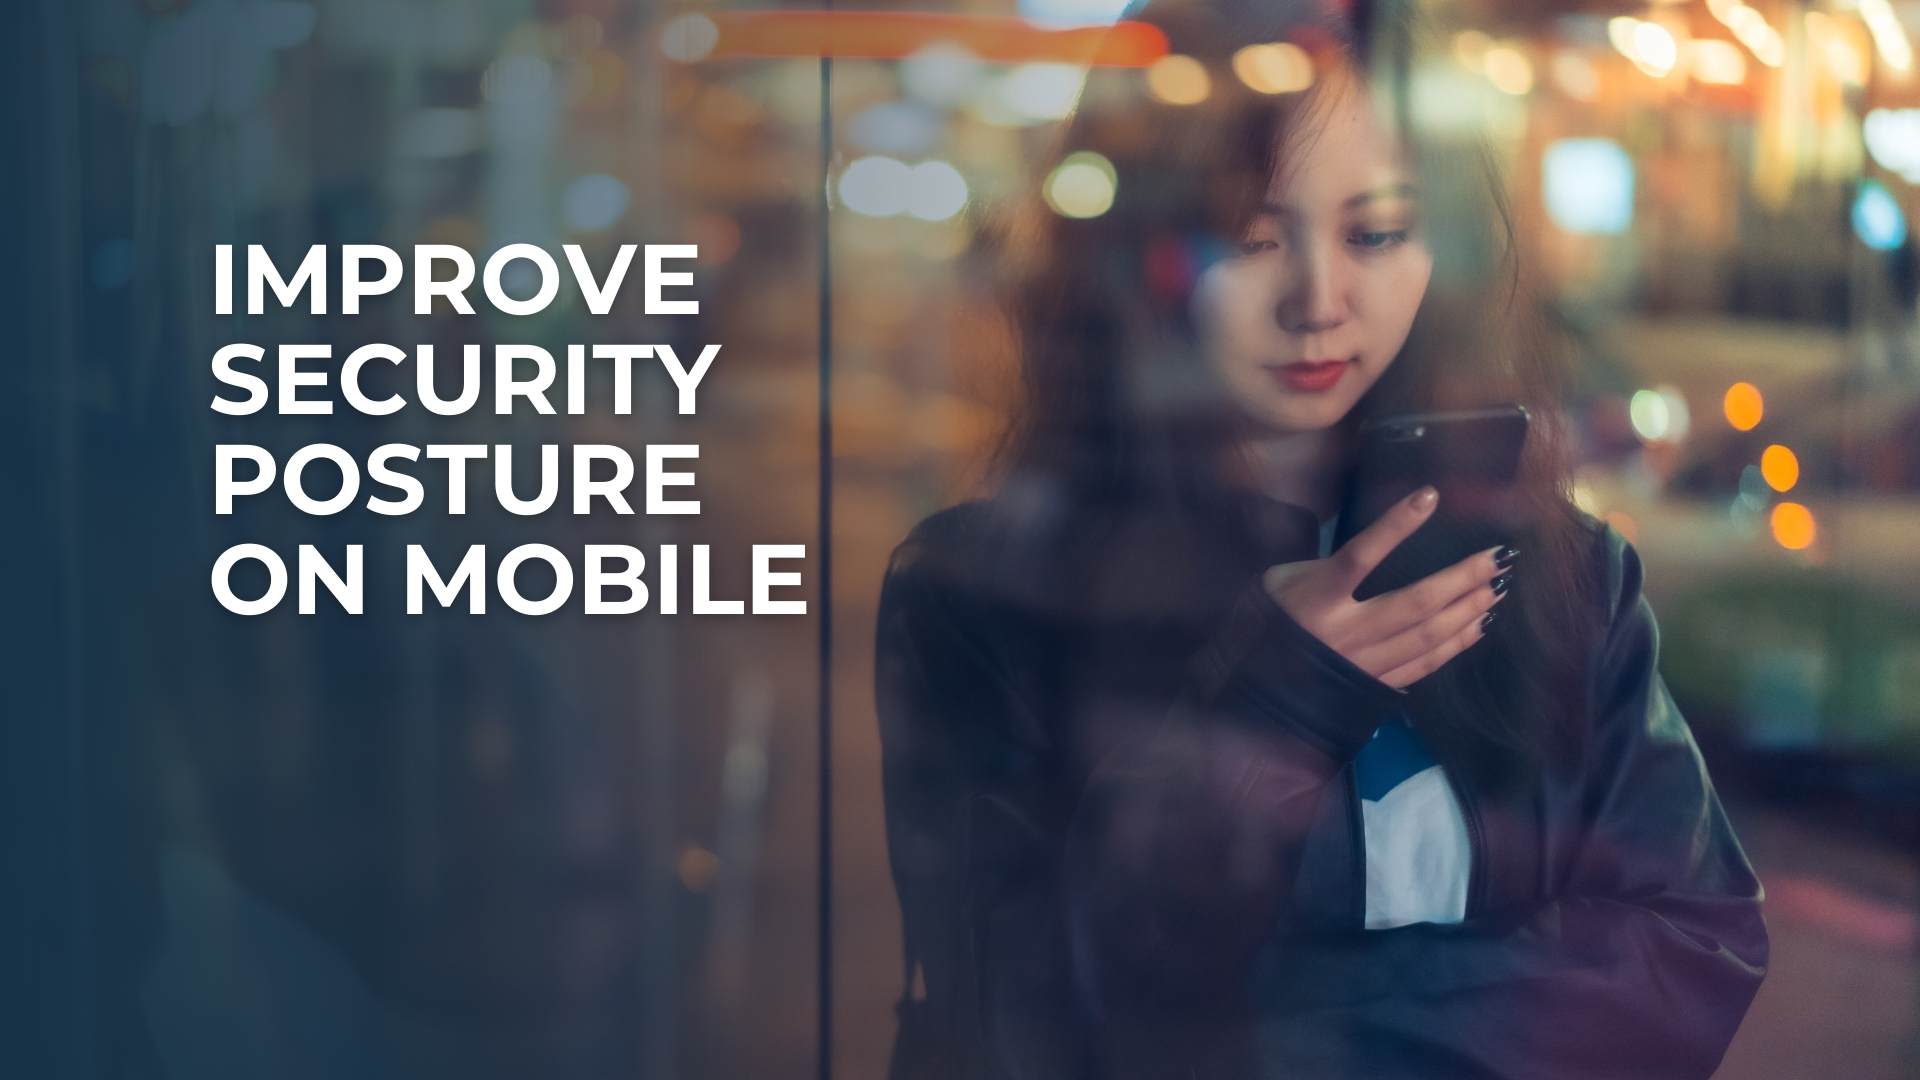 Improve Security Posture on Mobile